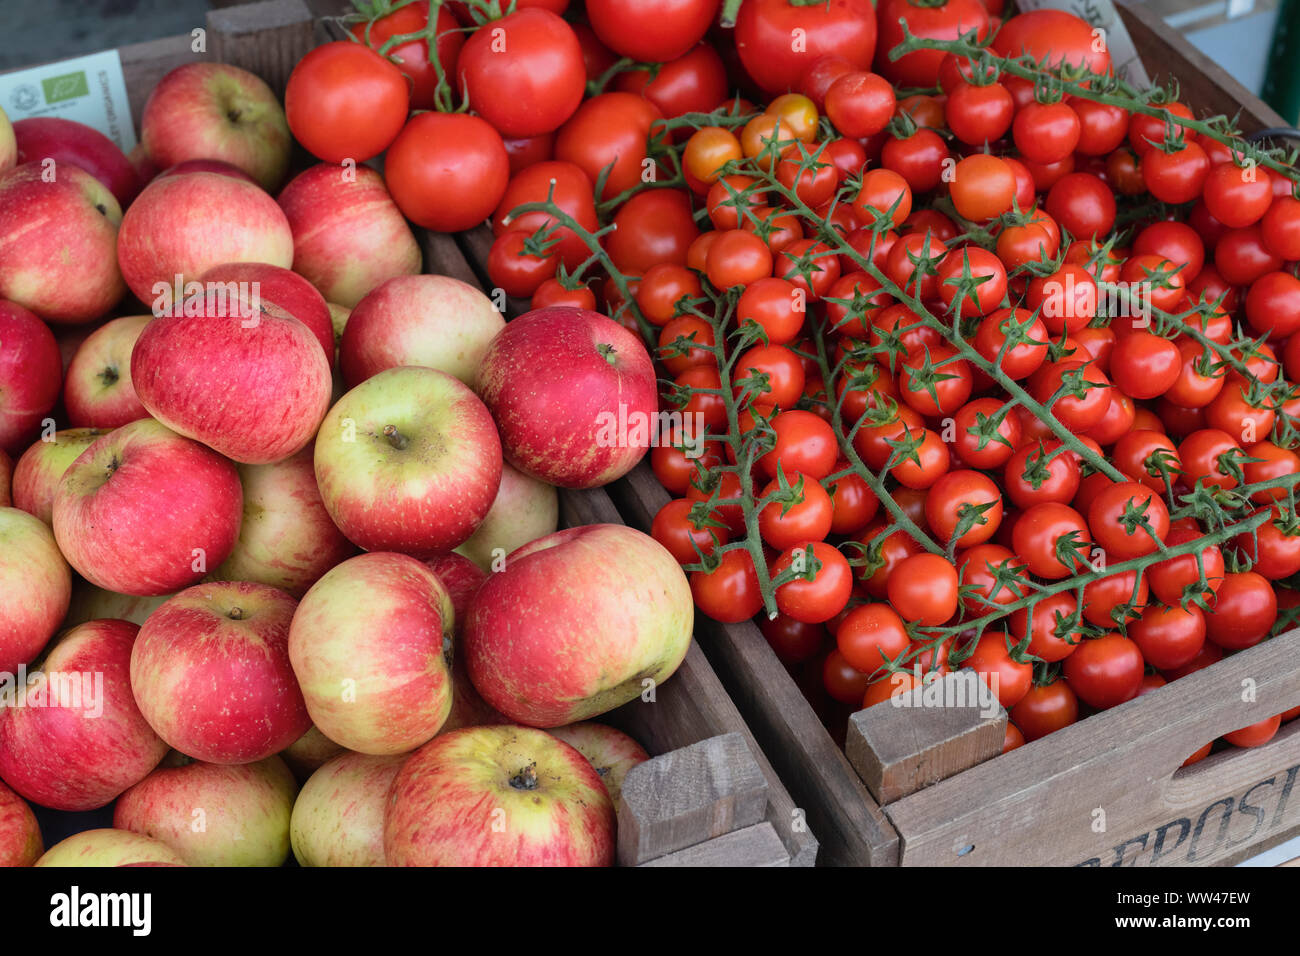 Apples and organic tomatoes for sale outside the greengrocers shop in Ledbury, Herefordshire. England Stock Photo